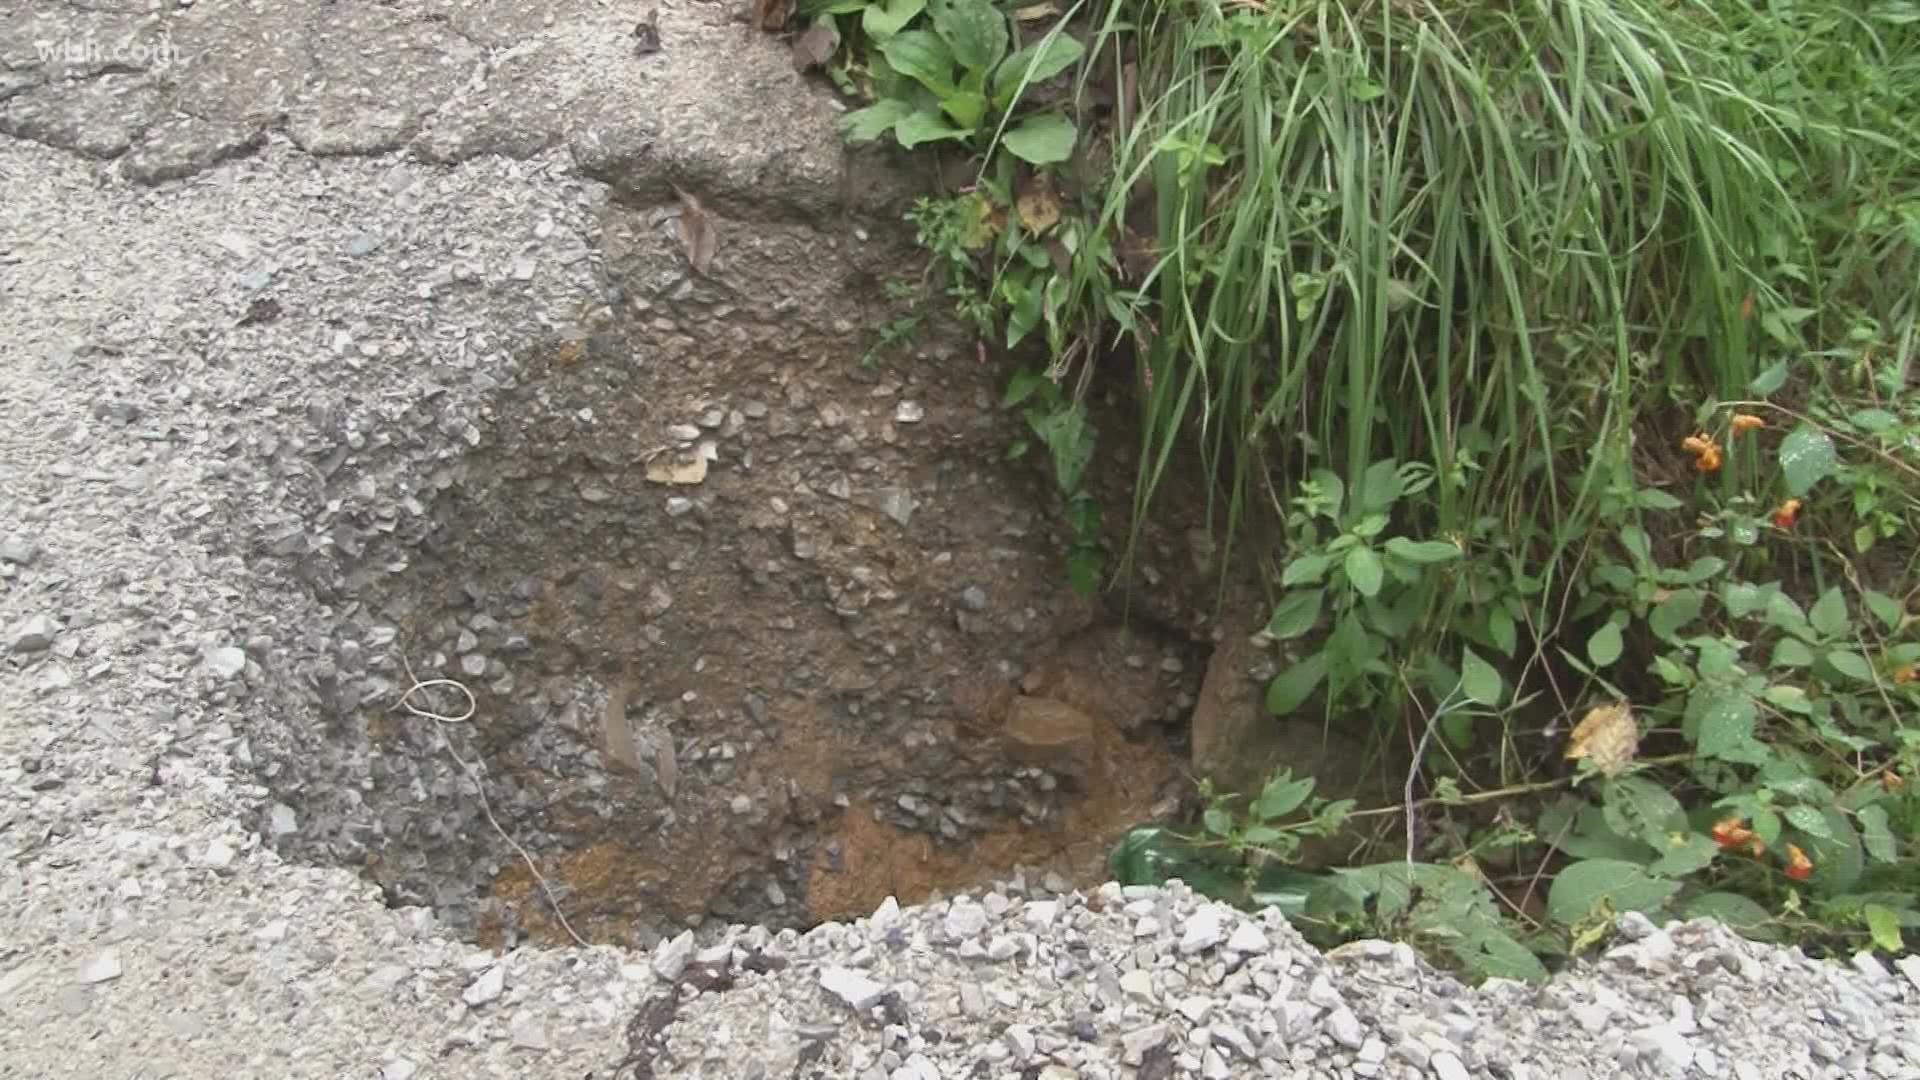 Viewers reached out about concerns that water was causing dangerous conditions and potholes in some Scott County roads.